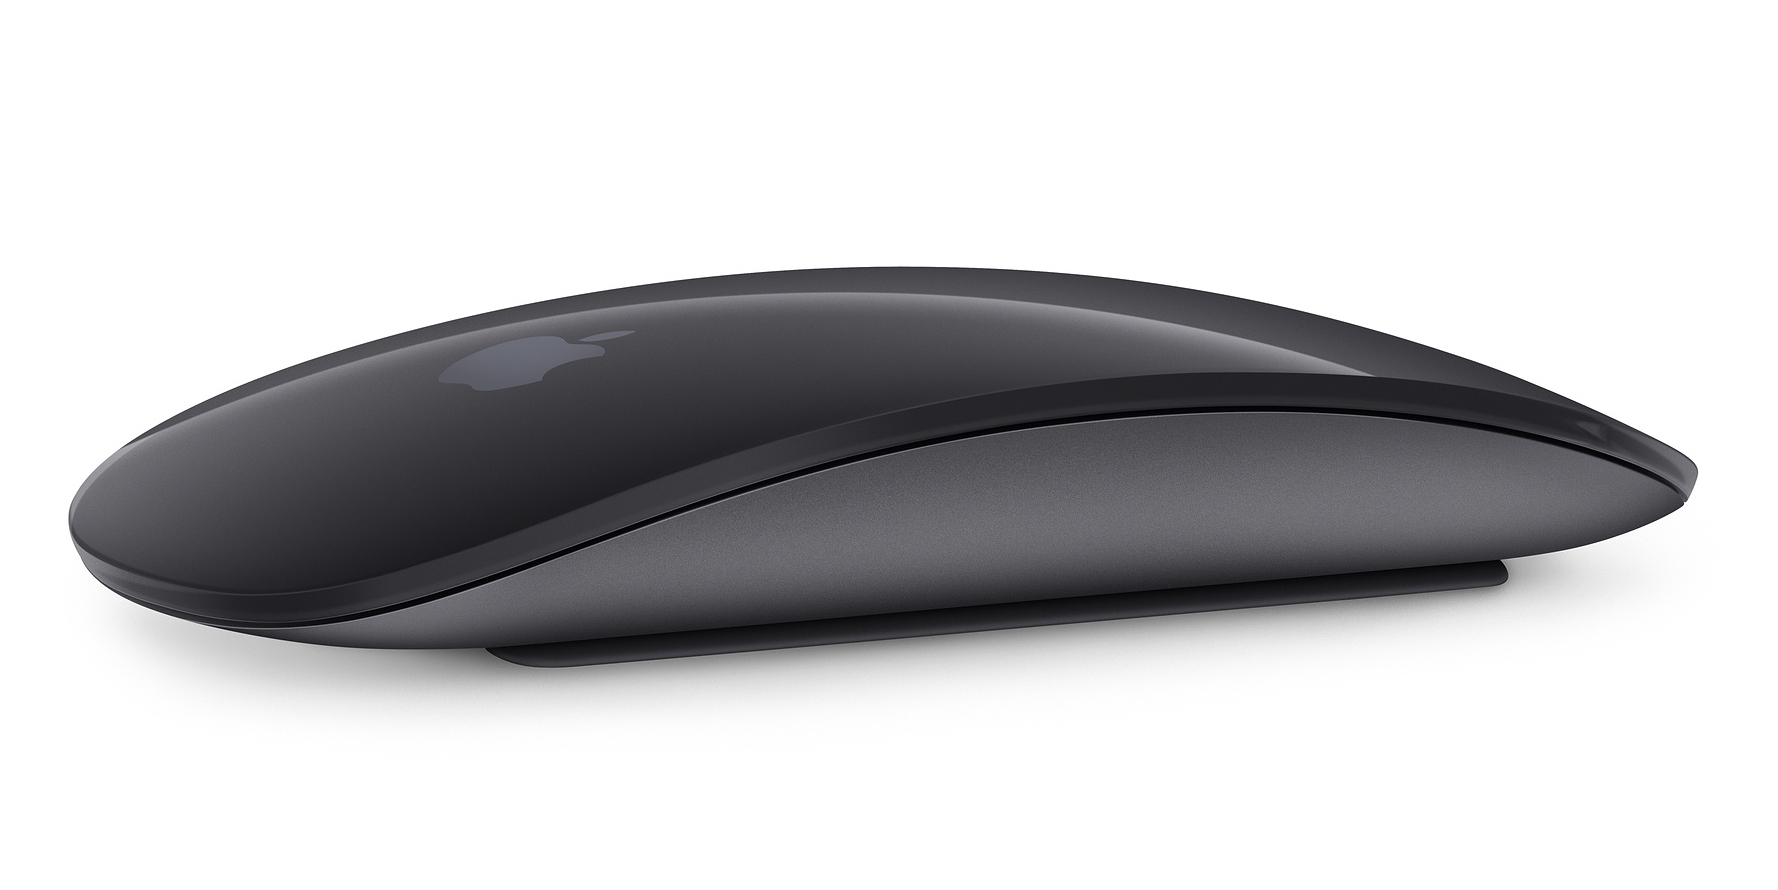 Apple's Magic Mouse 2 on sale from $40, Space Gray version now $86